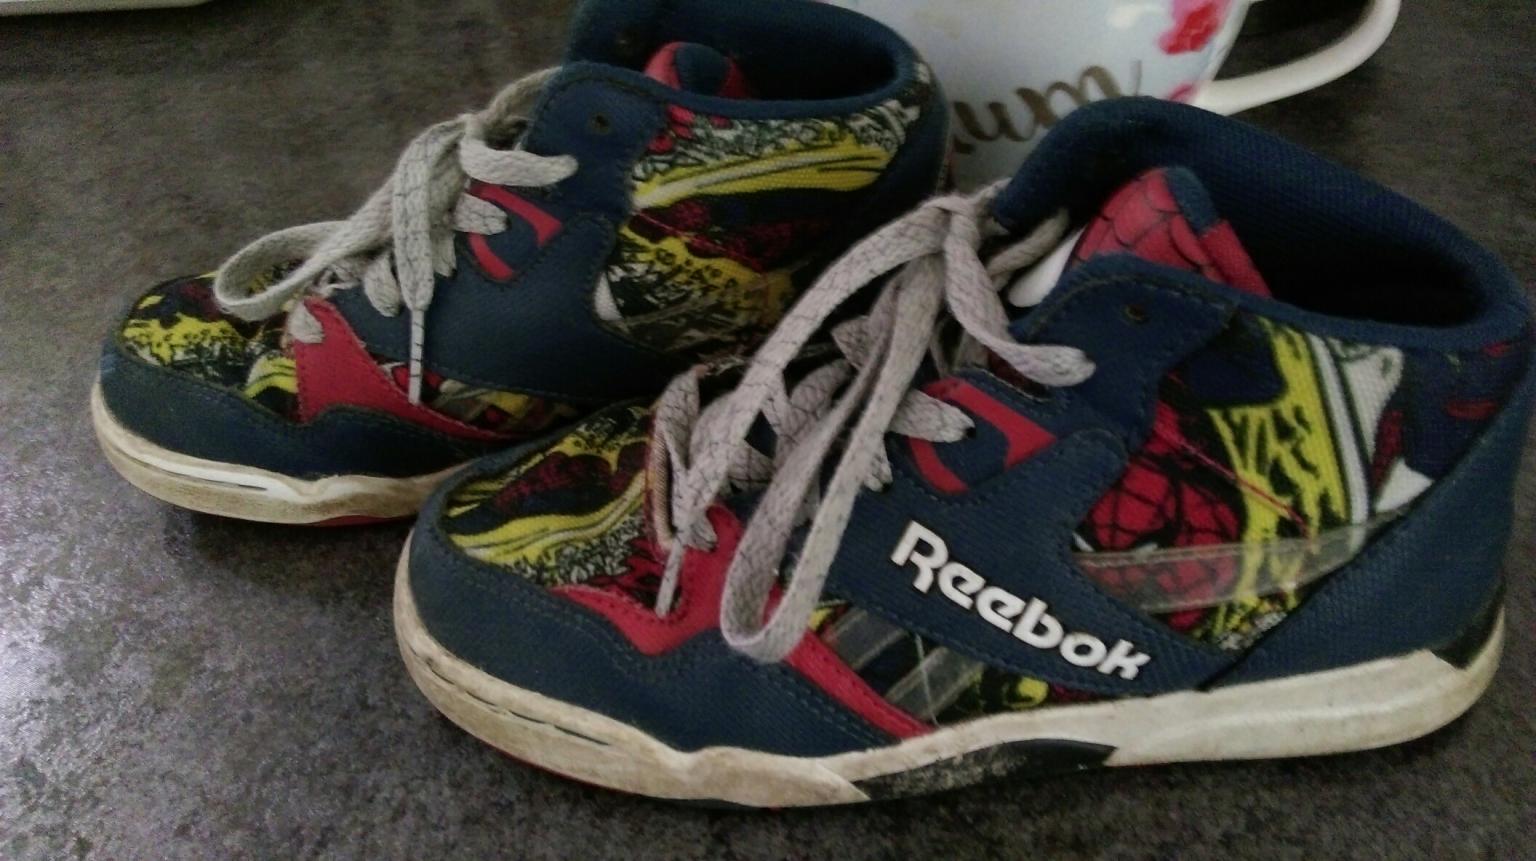 Reebok Spiderman shoes size 11 in NG17 